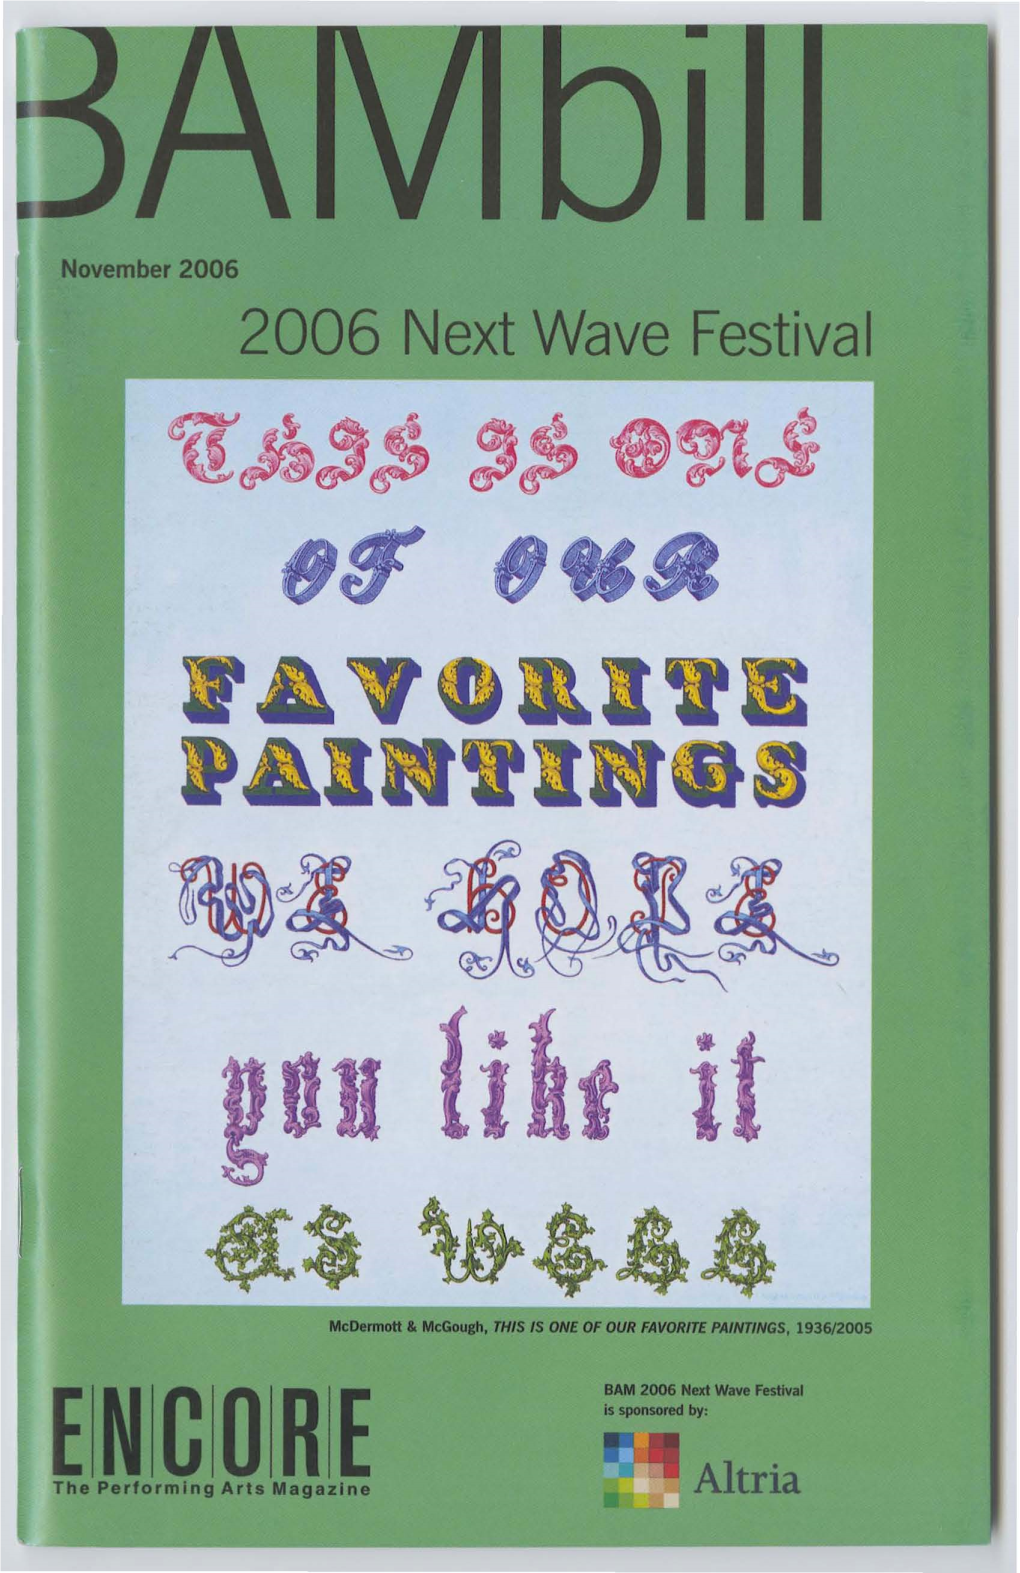 Programme for Twelfth Night at BAM Next Wave Festival in 2006